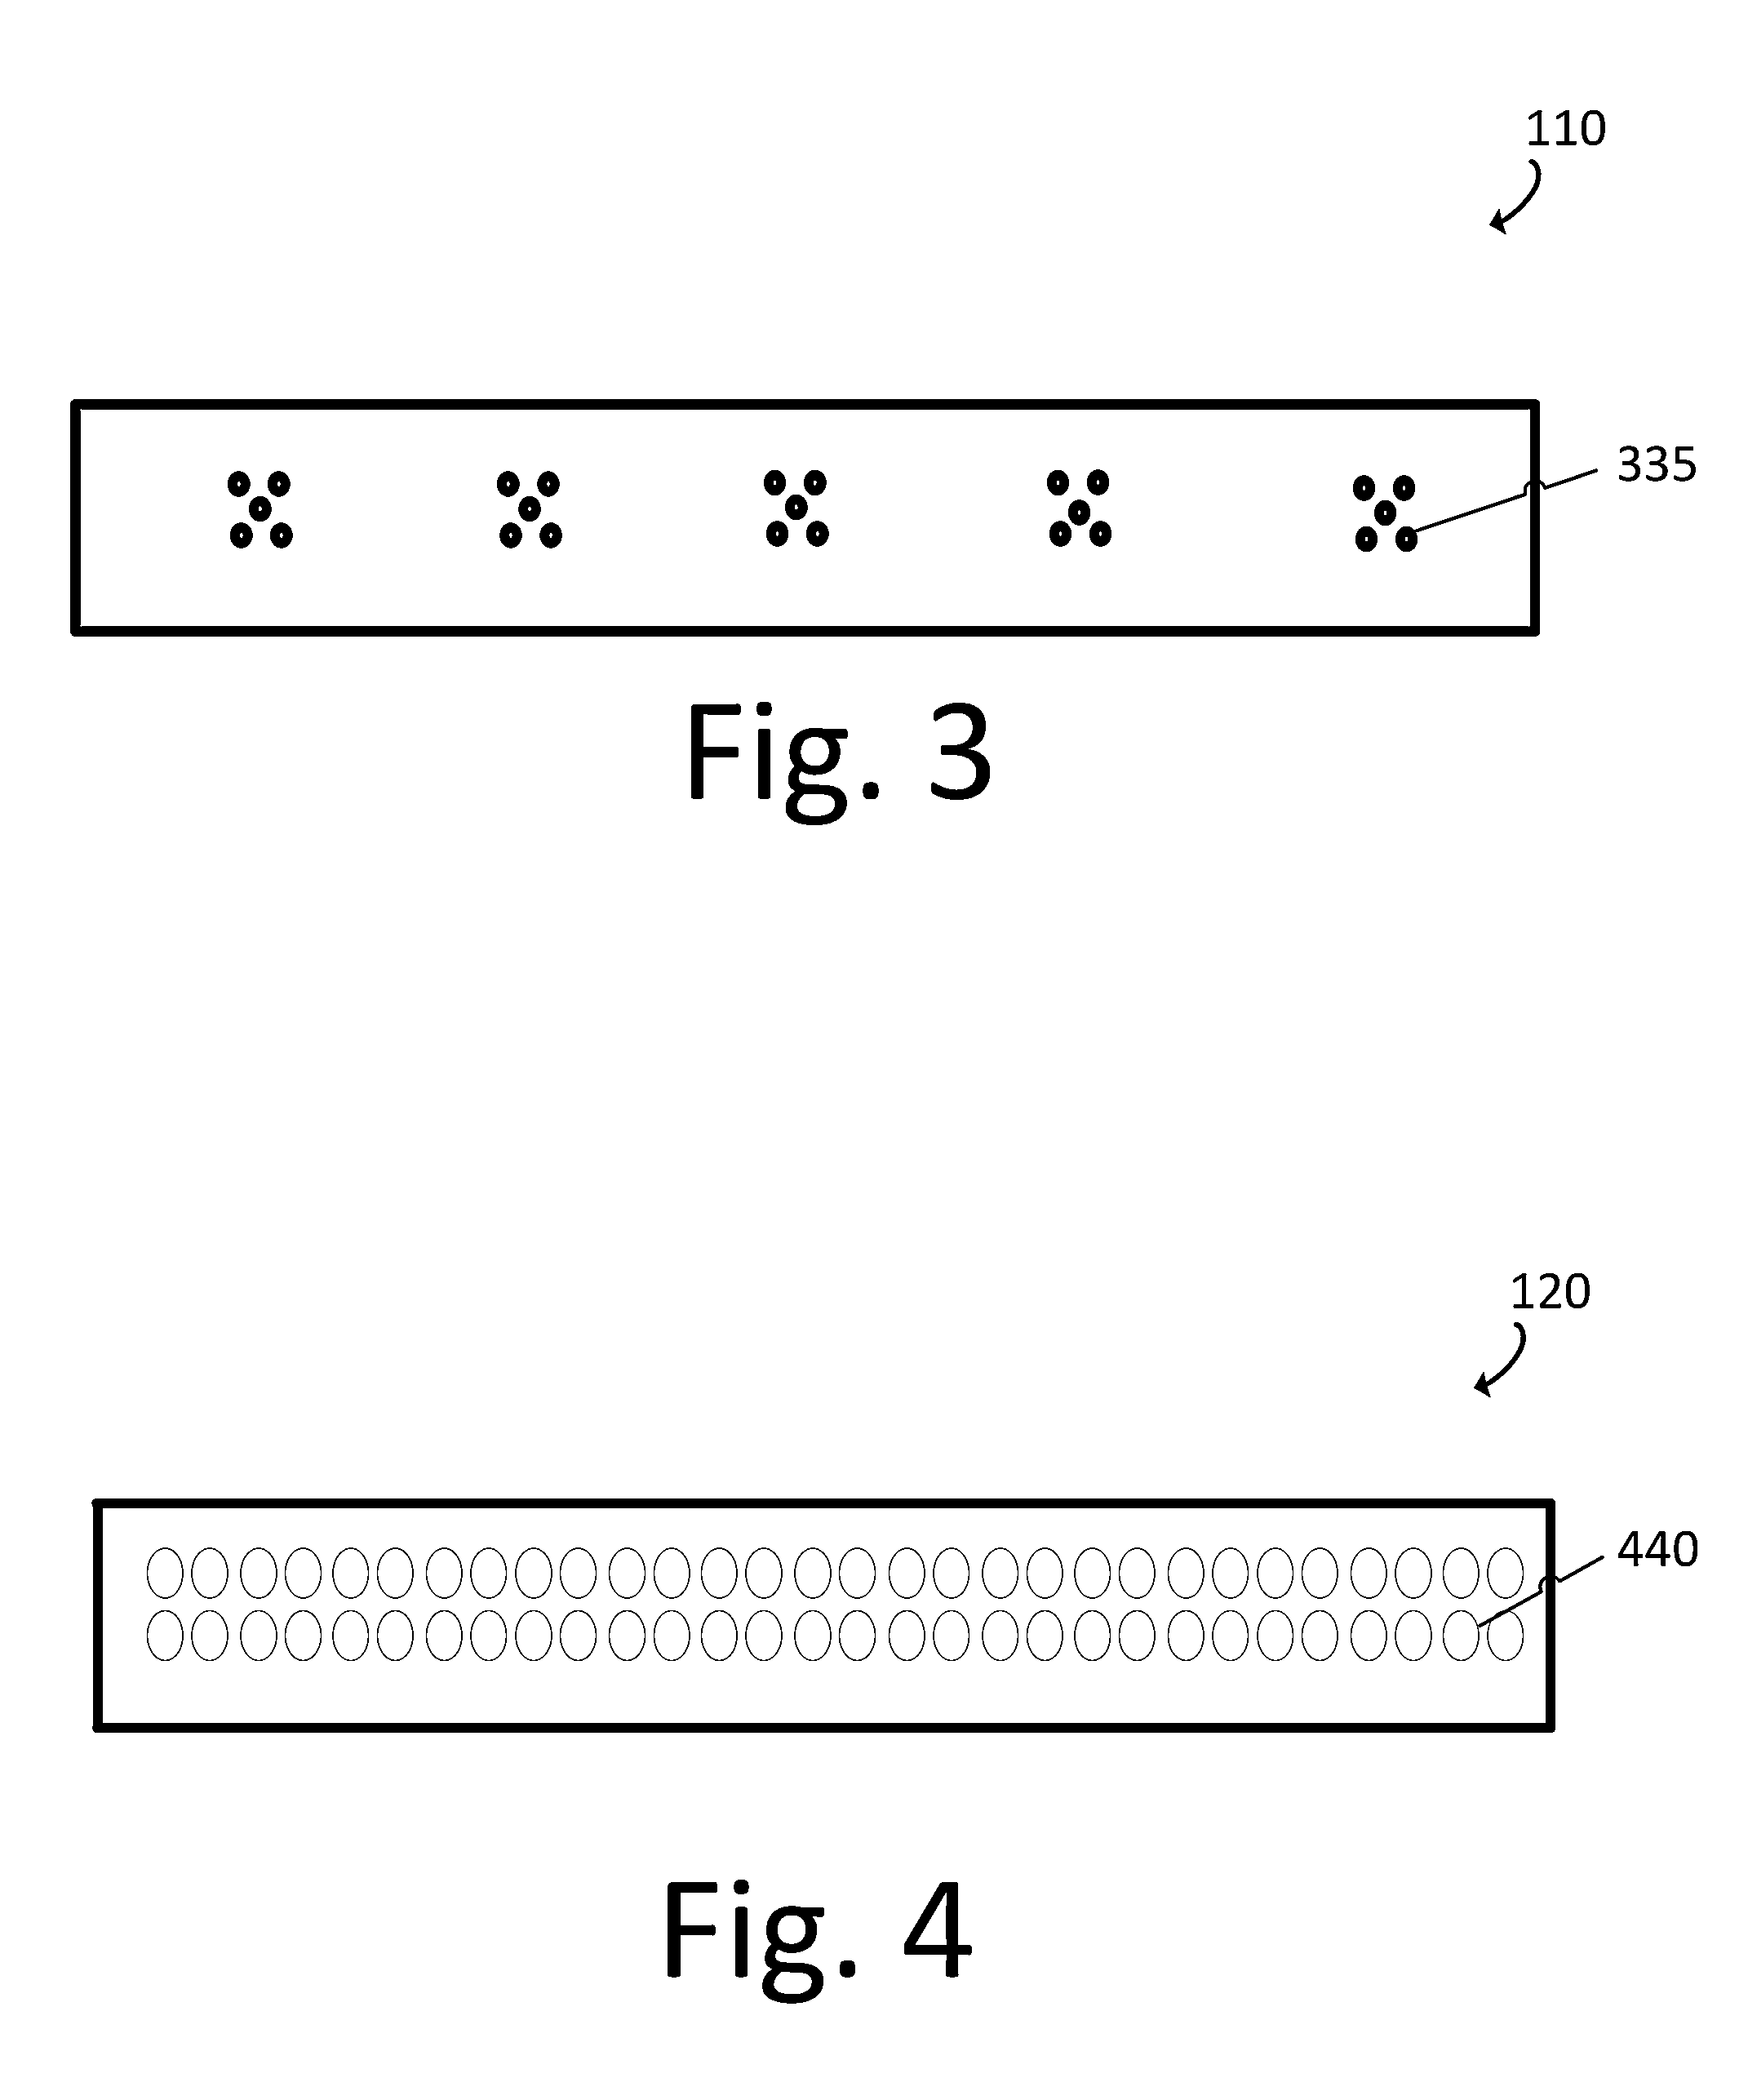 Photoresist film with adhesive layer and microspheres